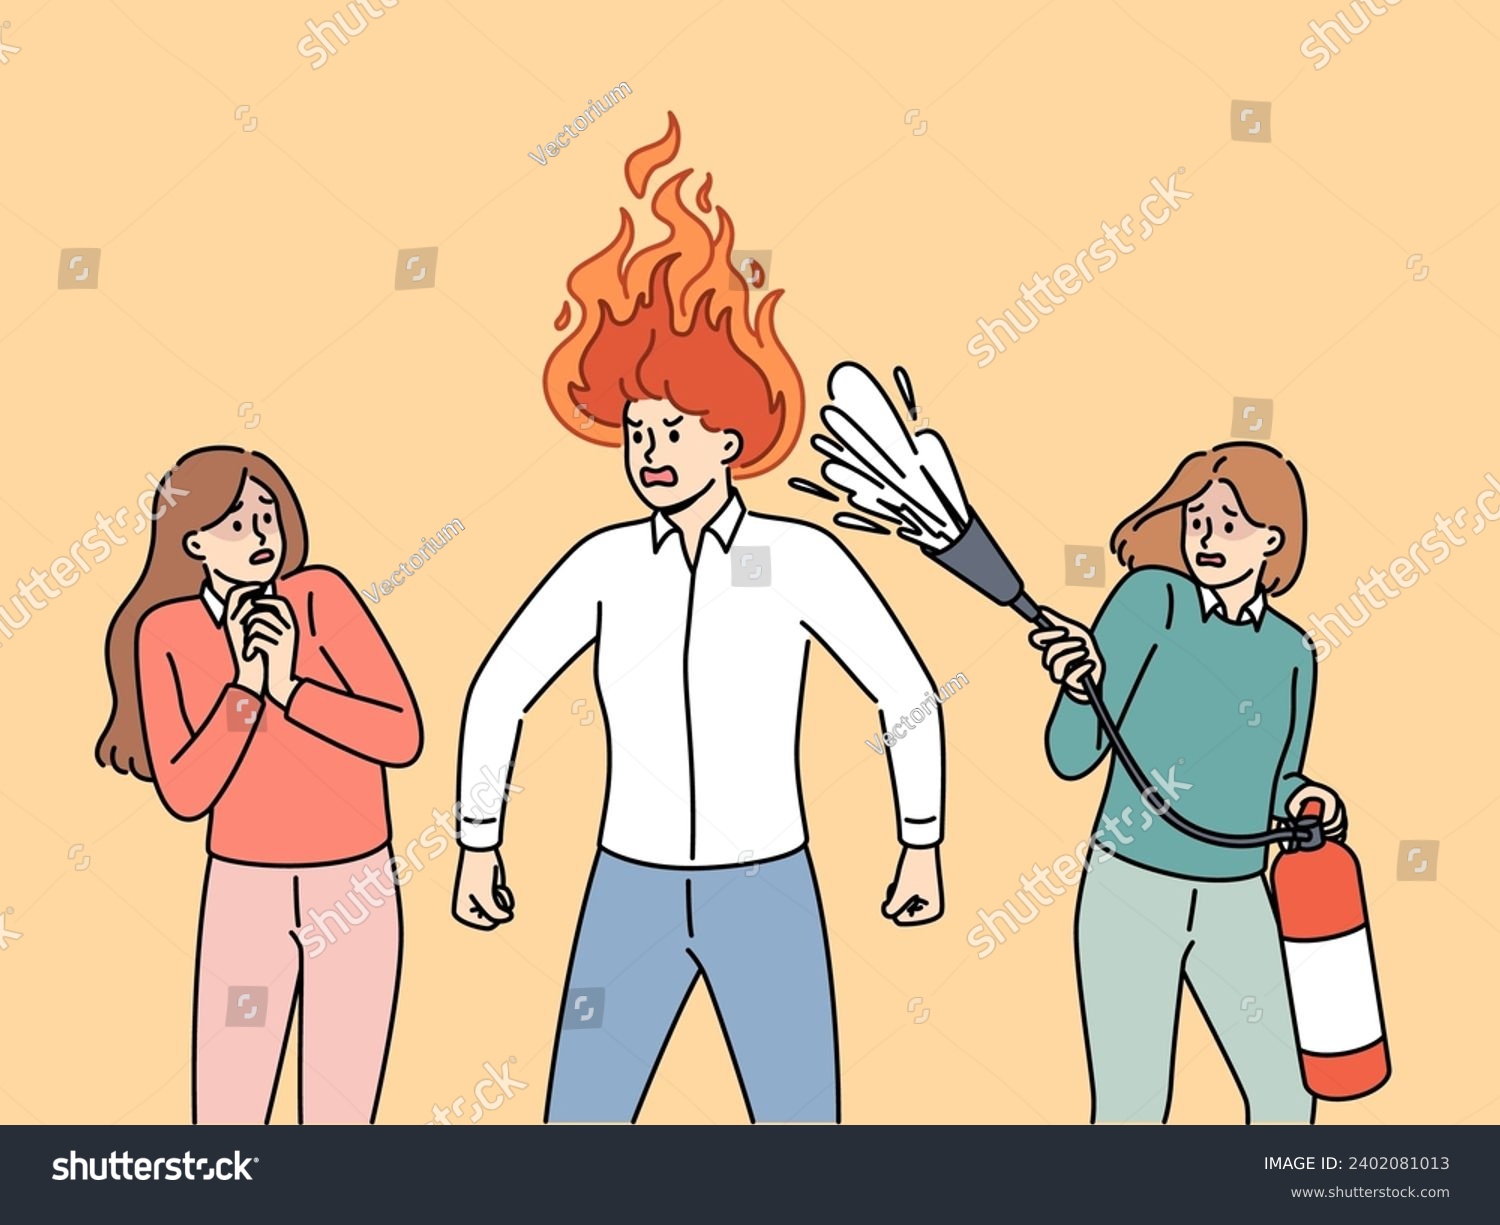 SVG of Aggressive man with flame on head stands near frightened colleagues with fire extinguisher. Aggressive manager needs training in self-control, for concept of inappropriate boss behavior svg